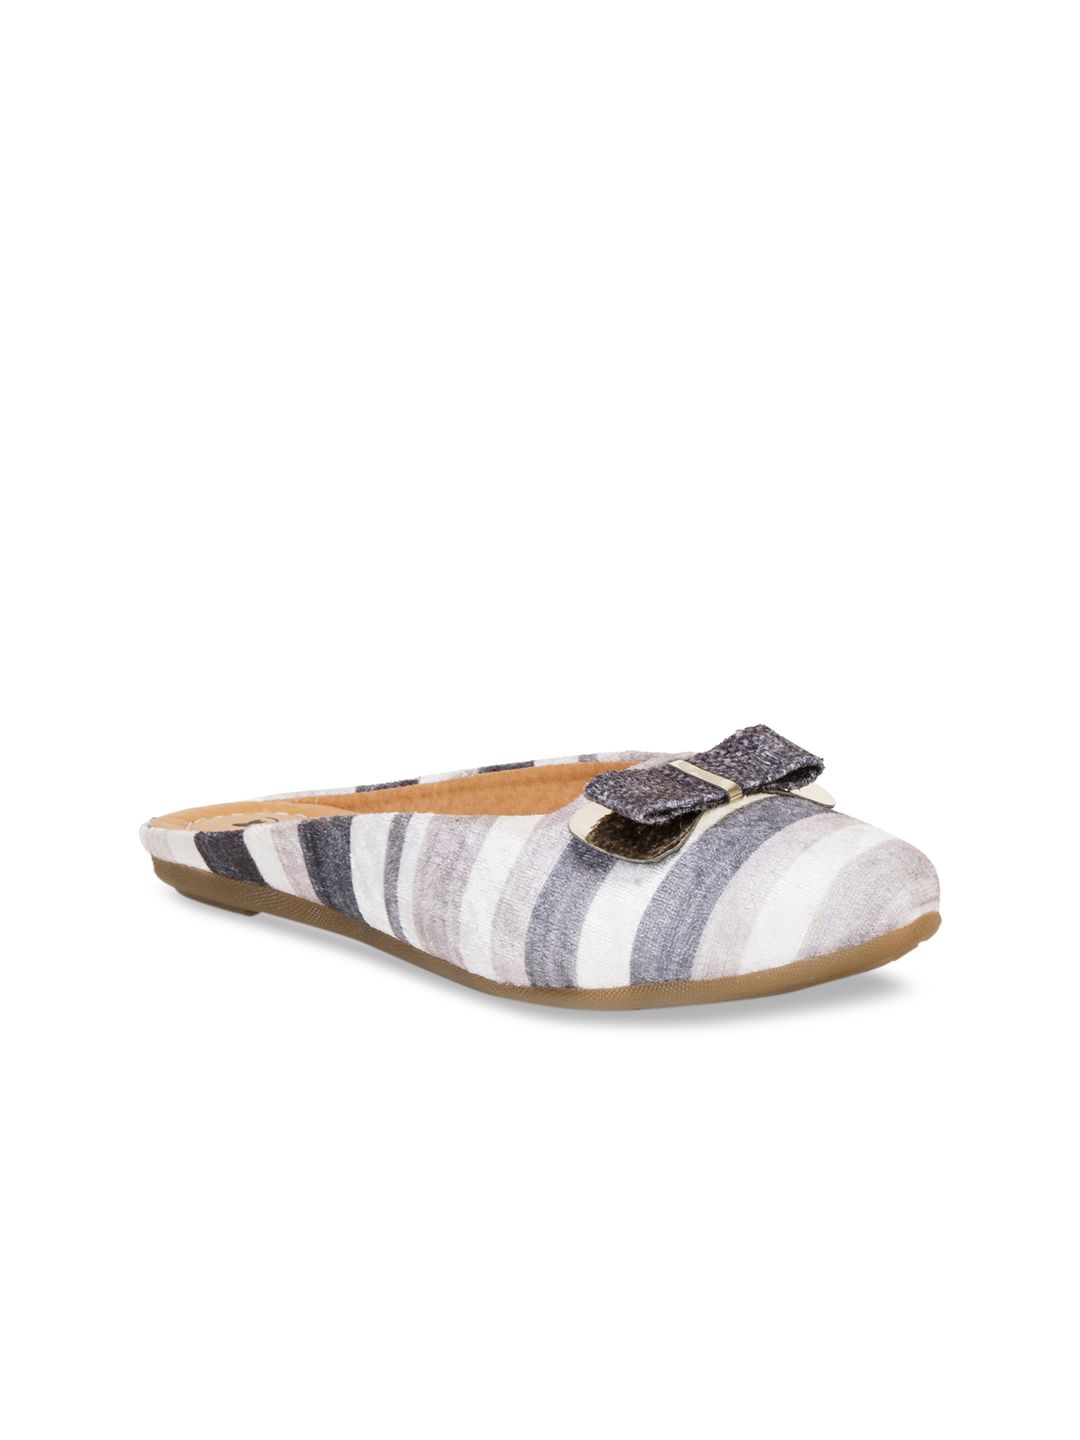 Denill Women White Printed Mules with Bows Flats Price in India